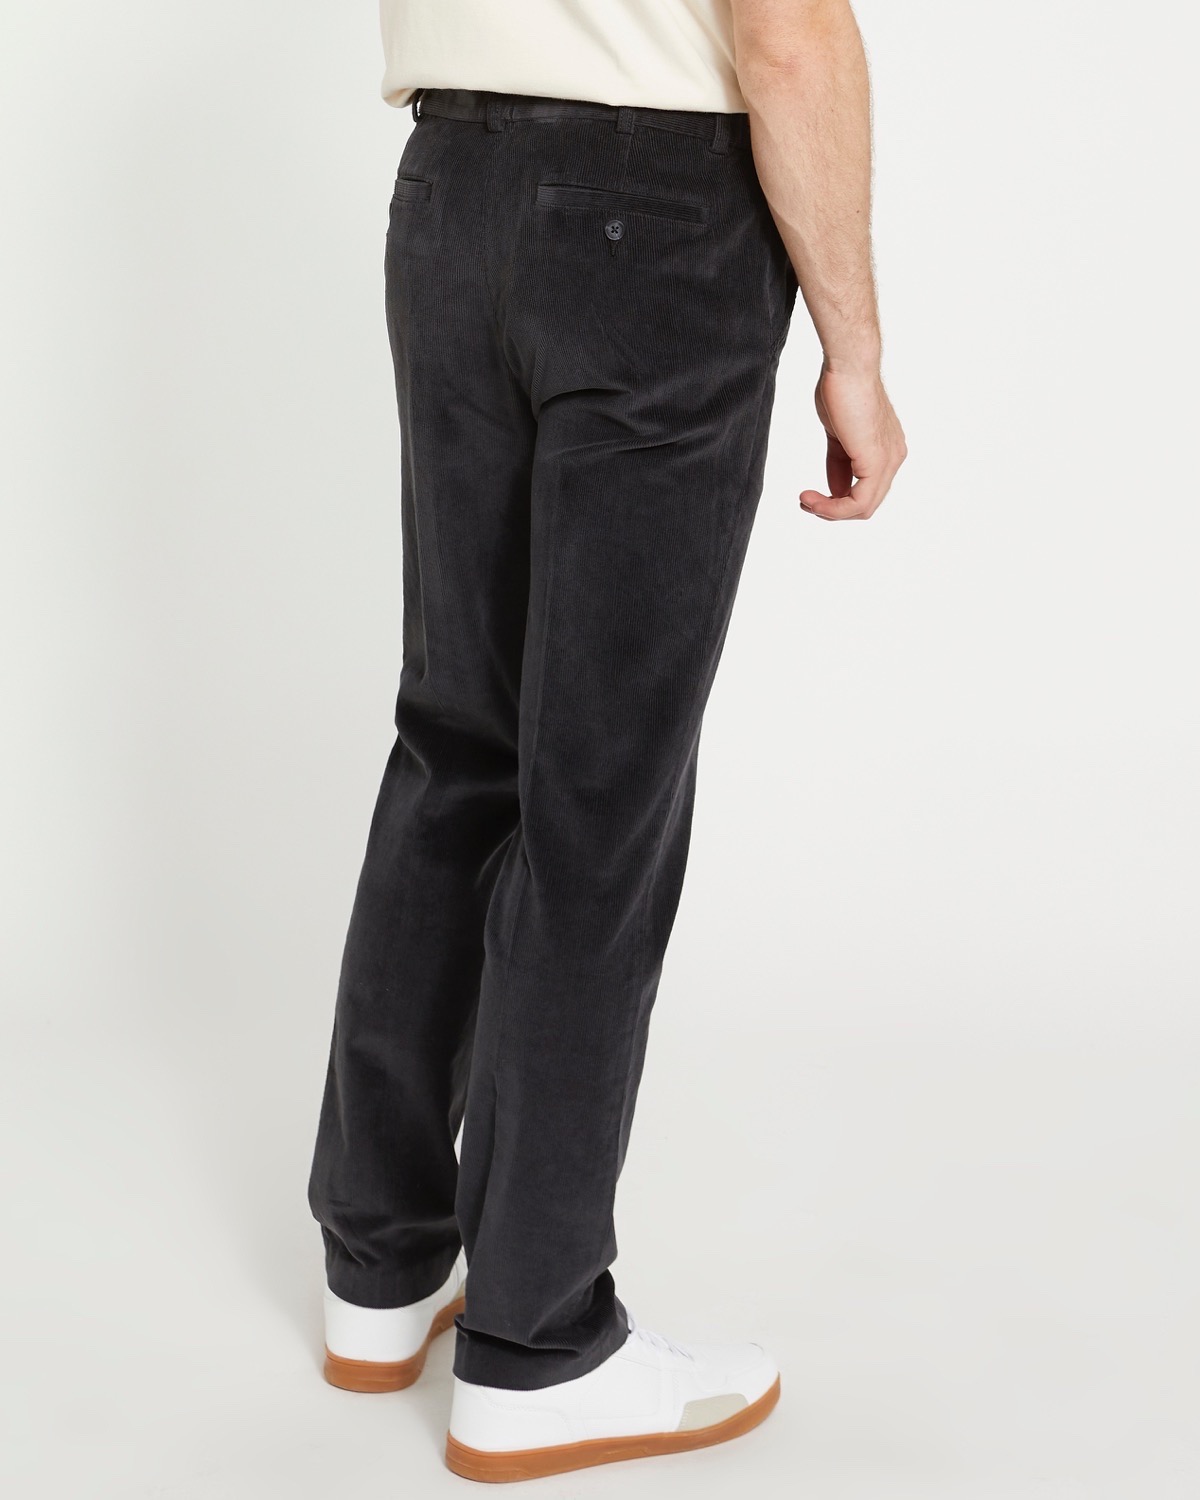 O'Connell's Embroidered Wide Wale Corduroy Trousers - Skiing Penguins on  Black - Men's Clothing, Traditional Natural shouldered clothing, preppy  apparel